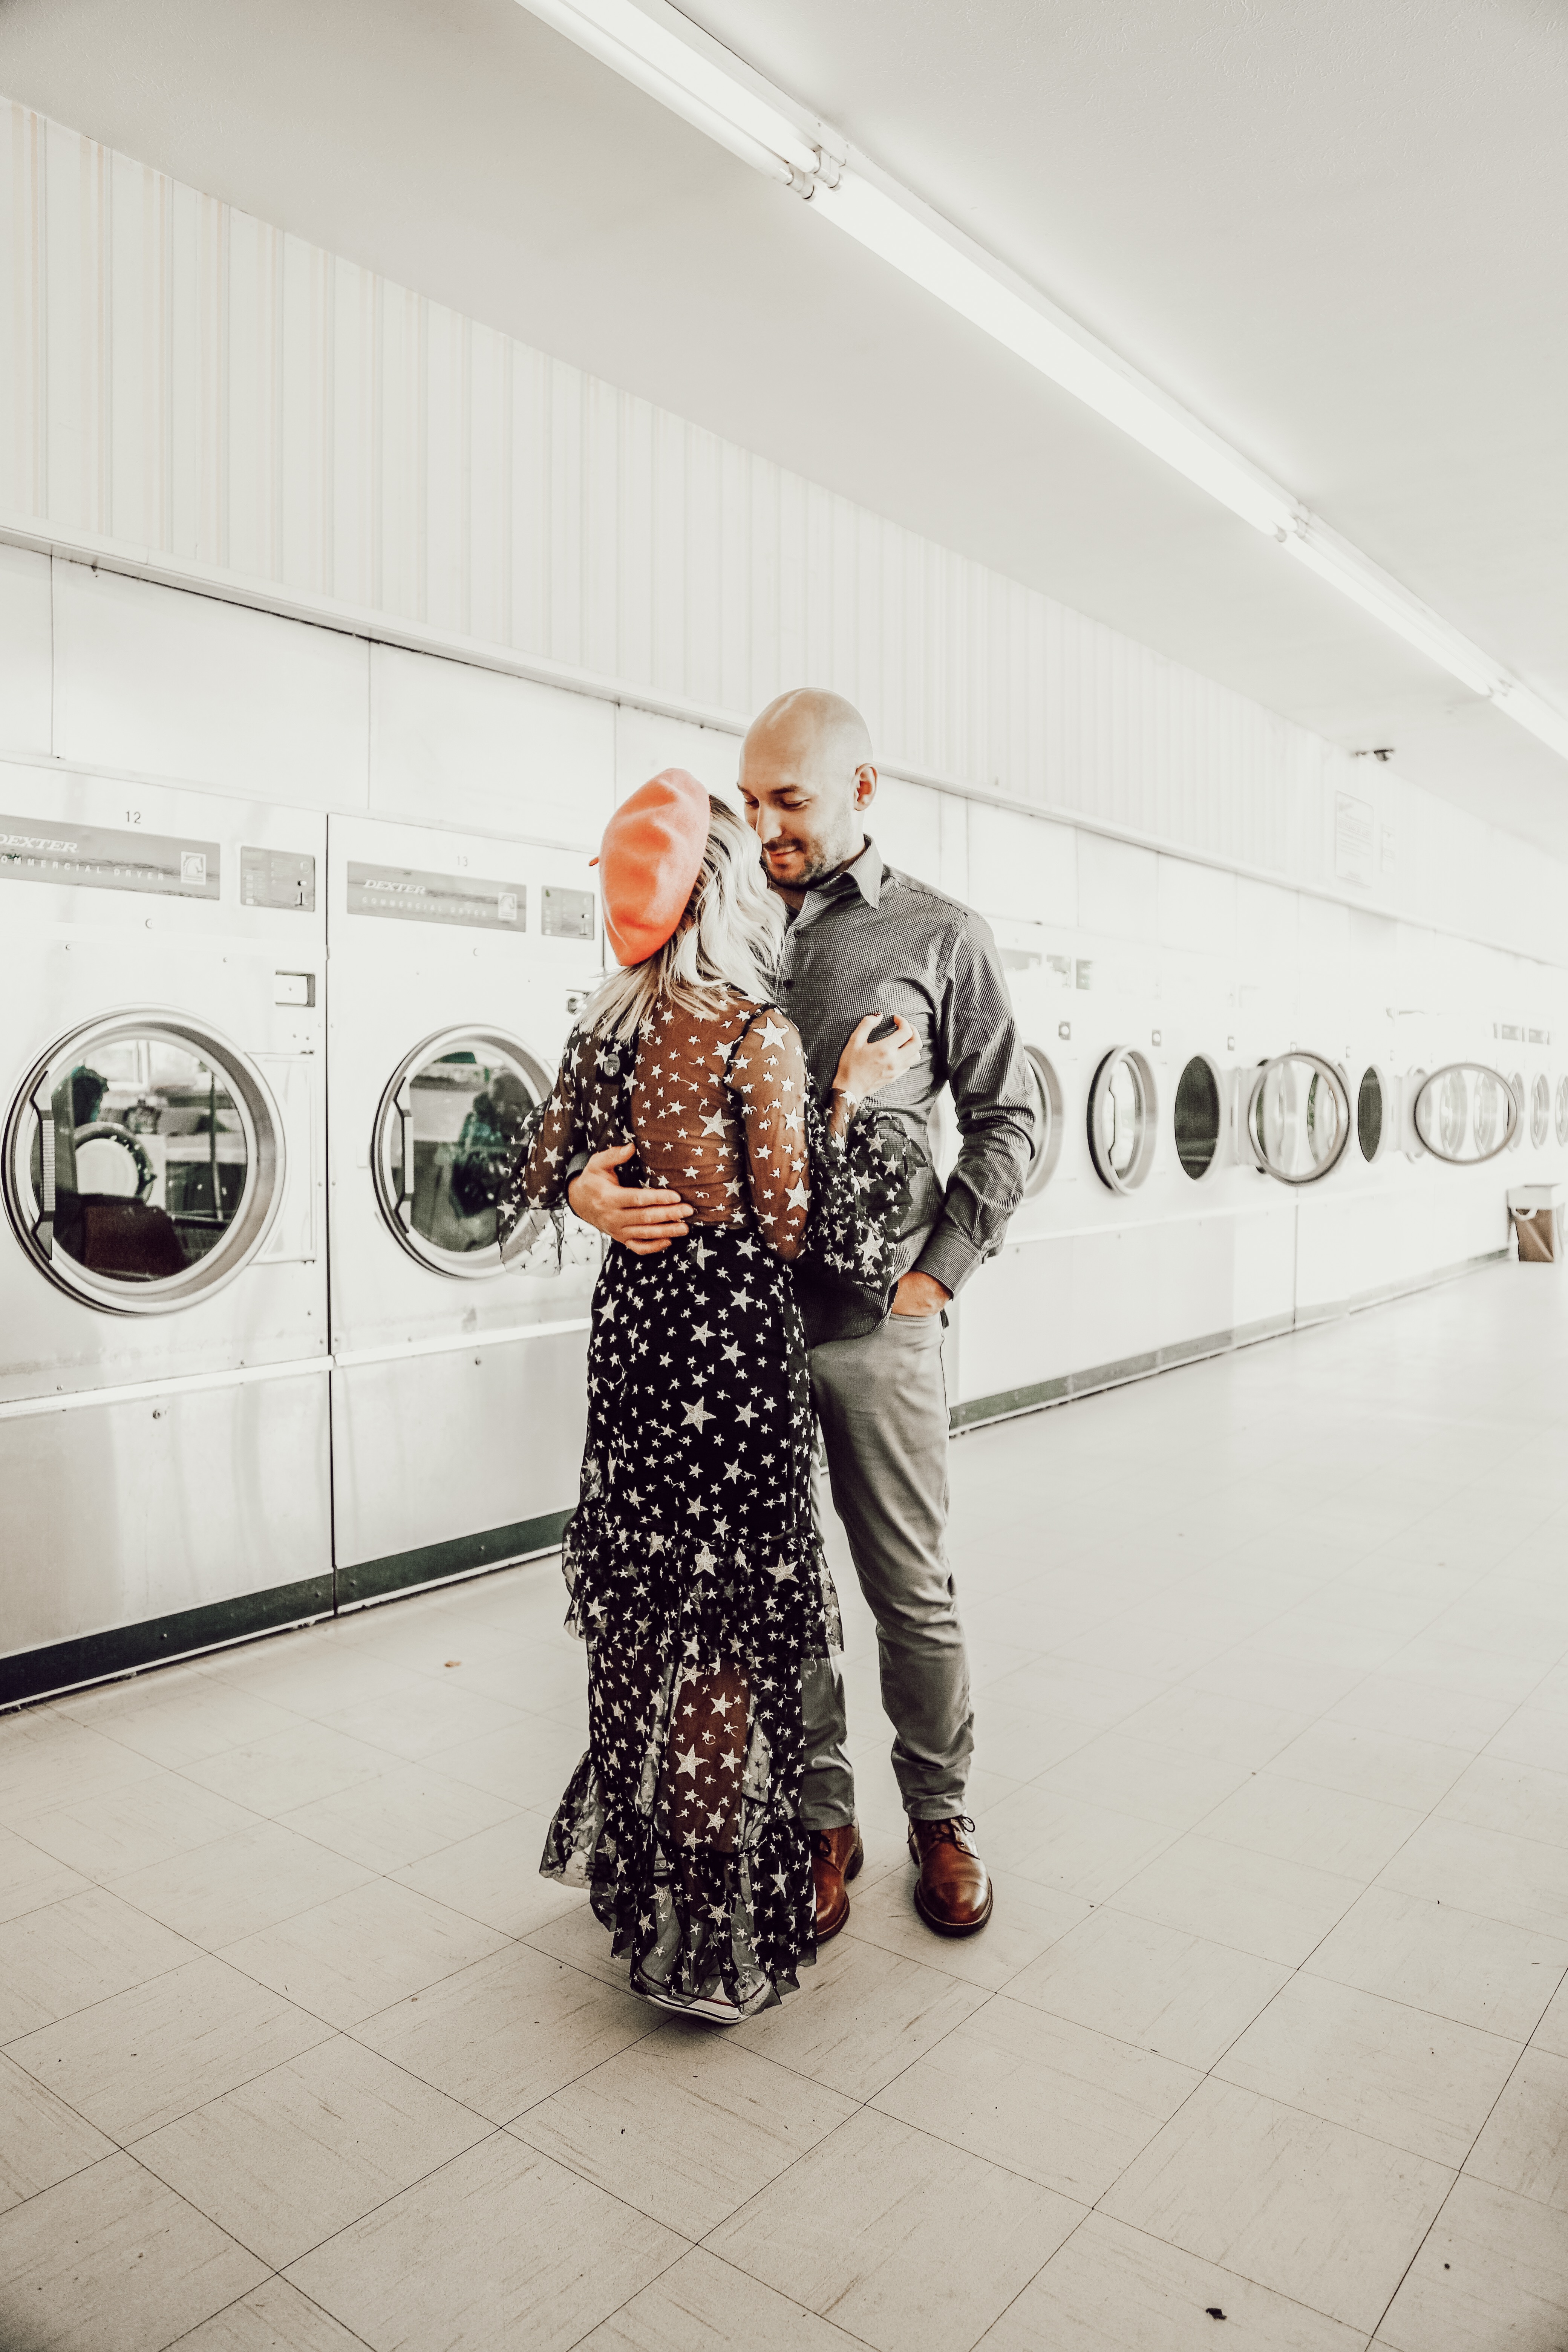 Alena Gidenko of modaprints.com shares her photoshoot with her hubby for Valentines Day at the Laundry Mat 